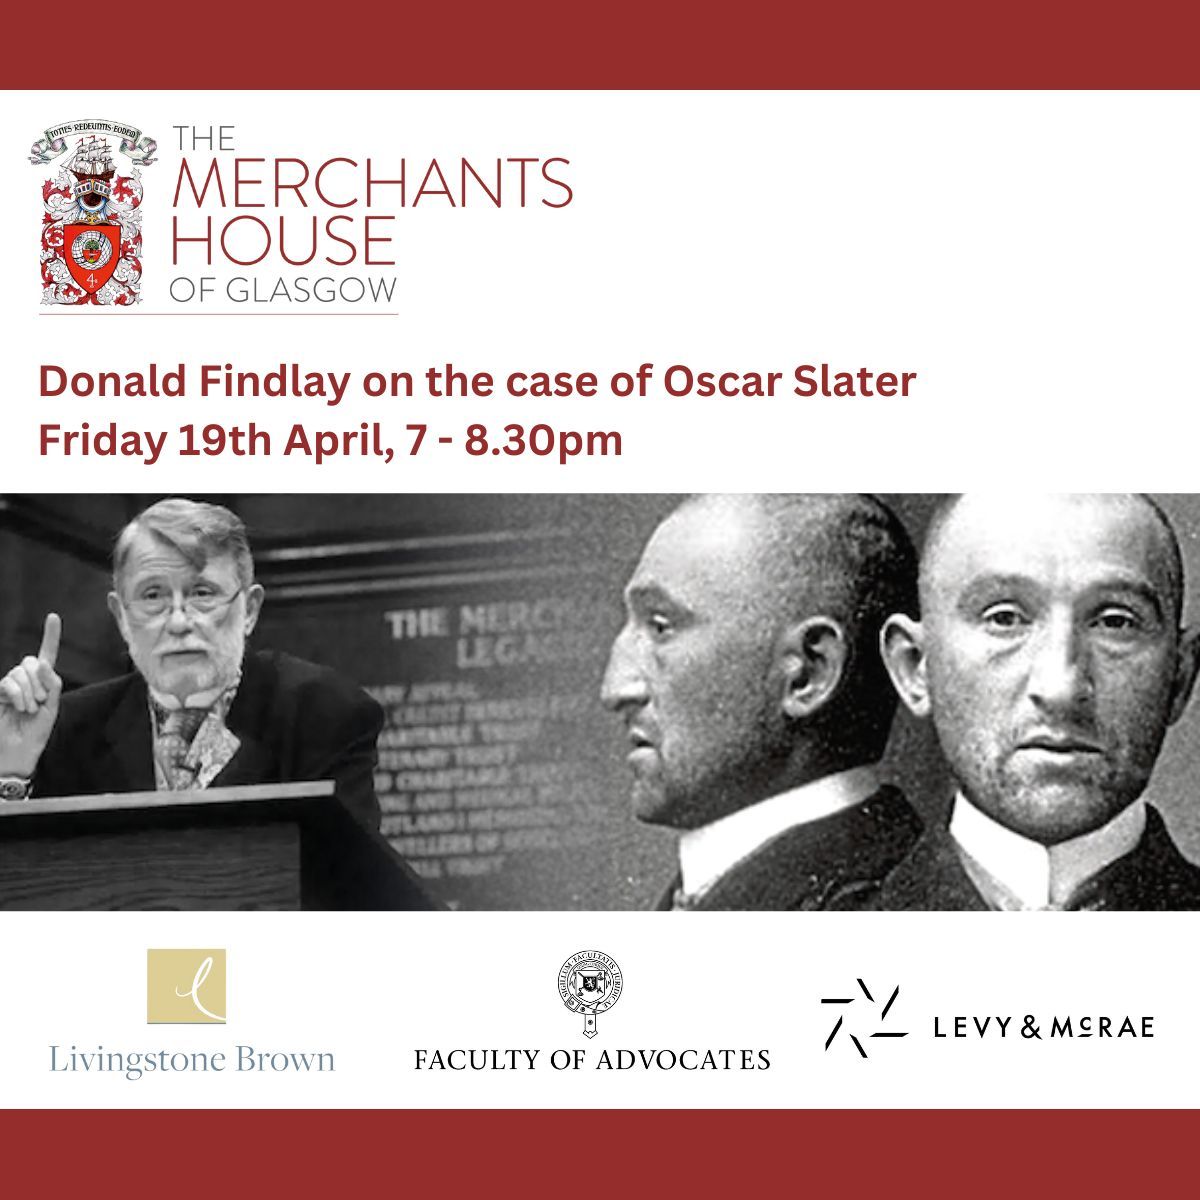 📢 Last few days to get your tickets for our talk on Oscar Slater by Donald Findlay KC. Book your ticket here: buff.ly/49RZPOr We are grateful to the Faculty of Advocates, Livingstone Brown and Levy & McRae for their generous sponsorship of this event.